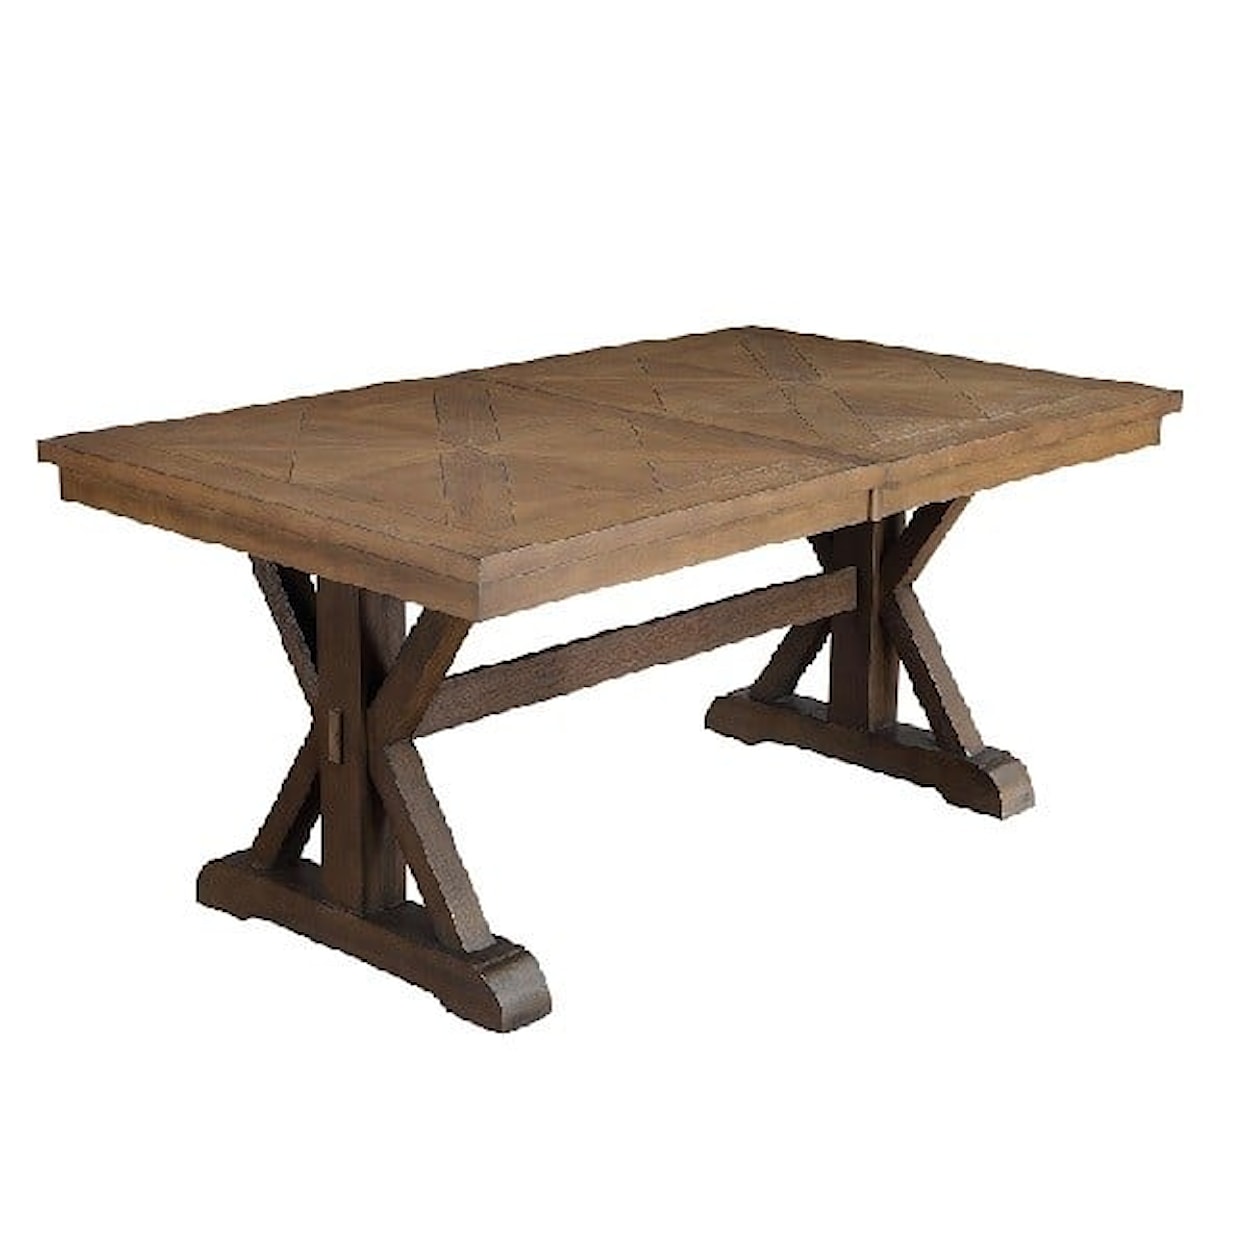 Acme Furniture Pascaline Dining Table